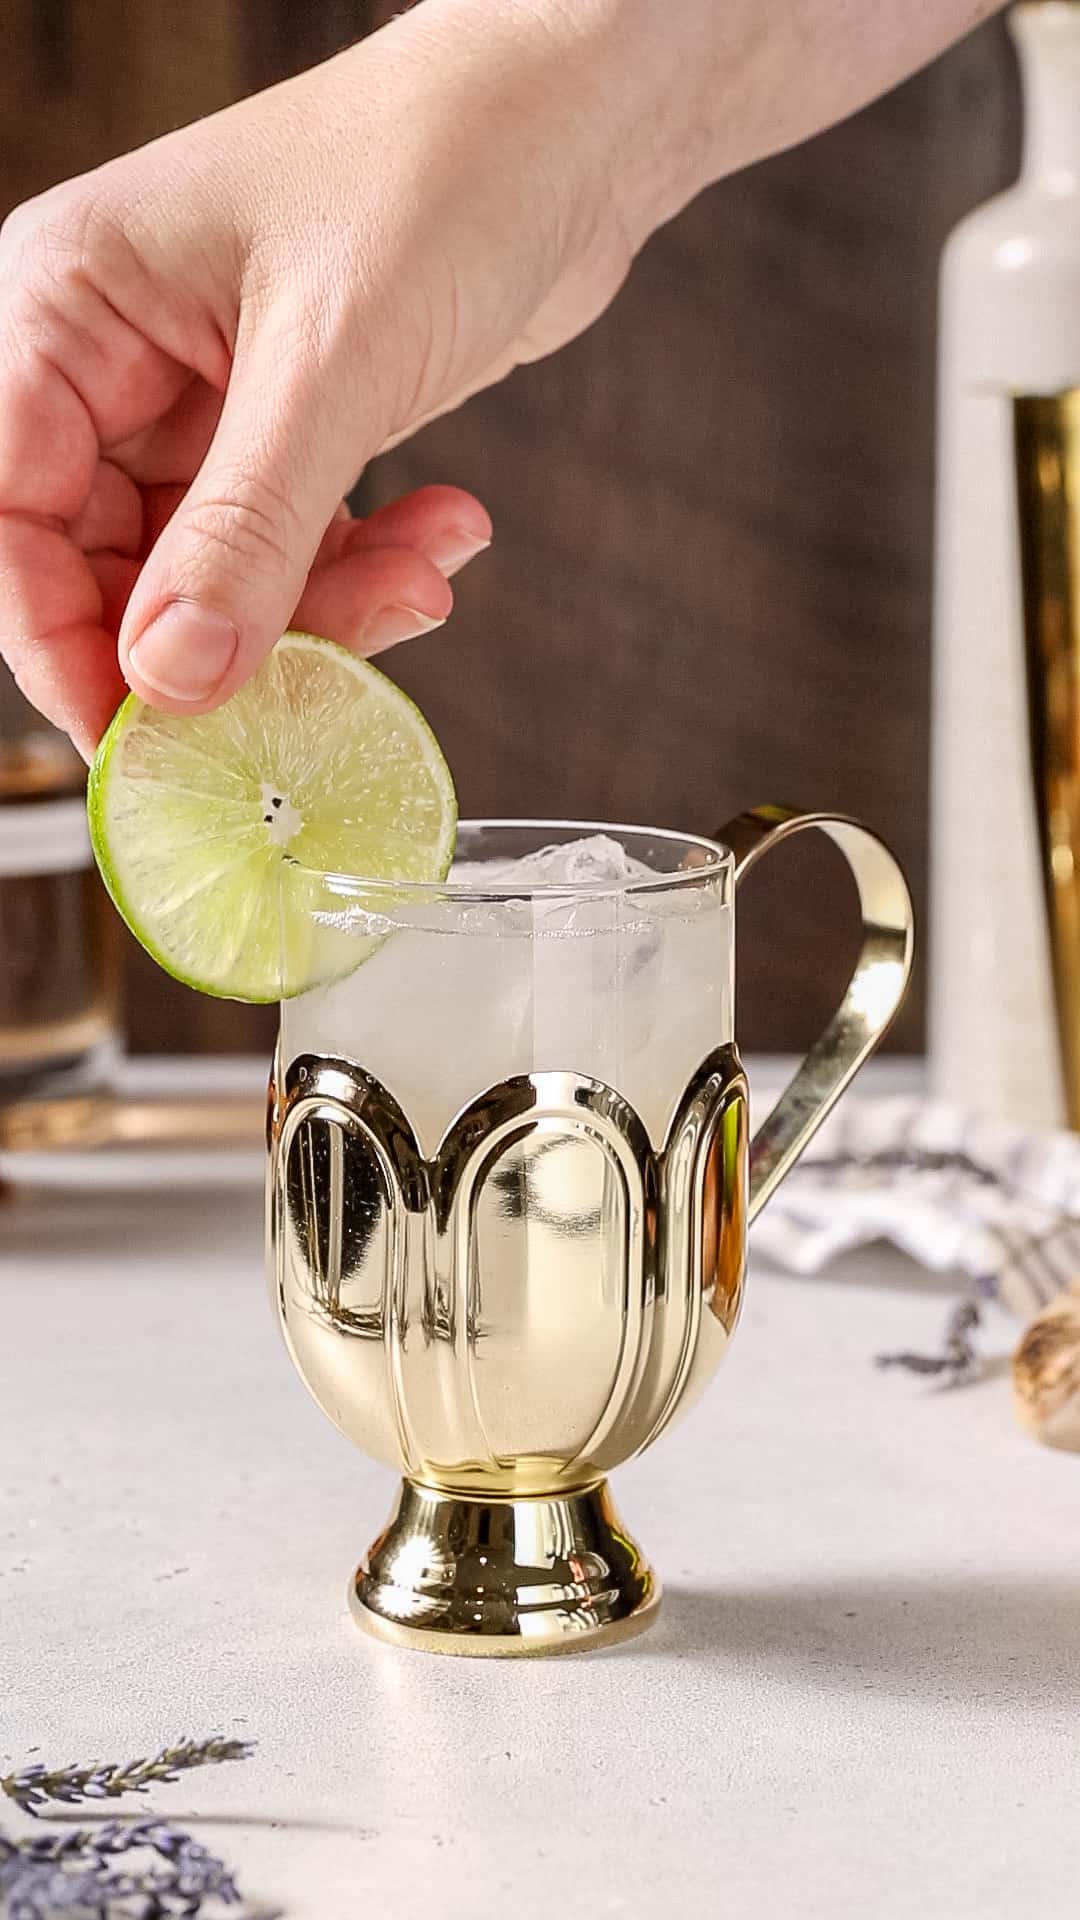 Hand adding a lime slice to the rim of a gold and glass cocktail mug.